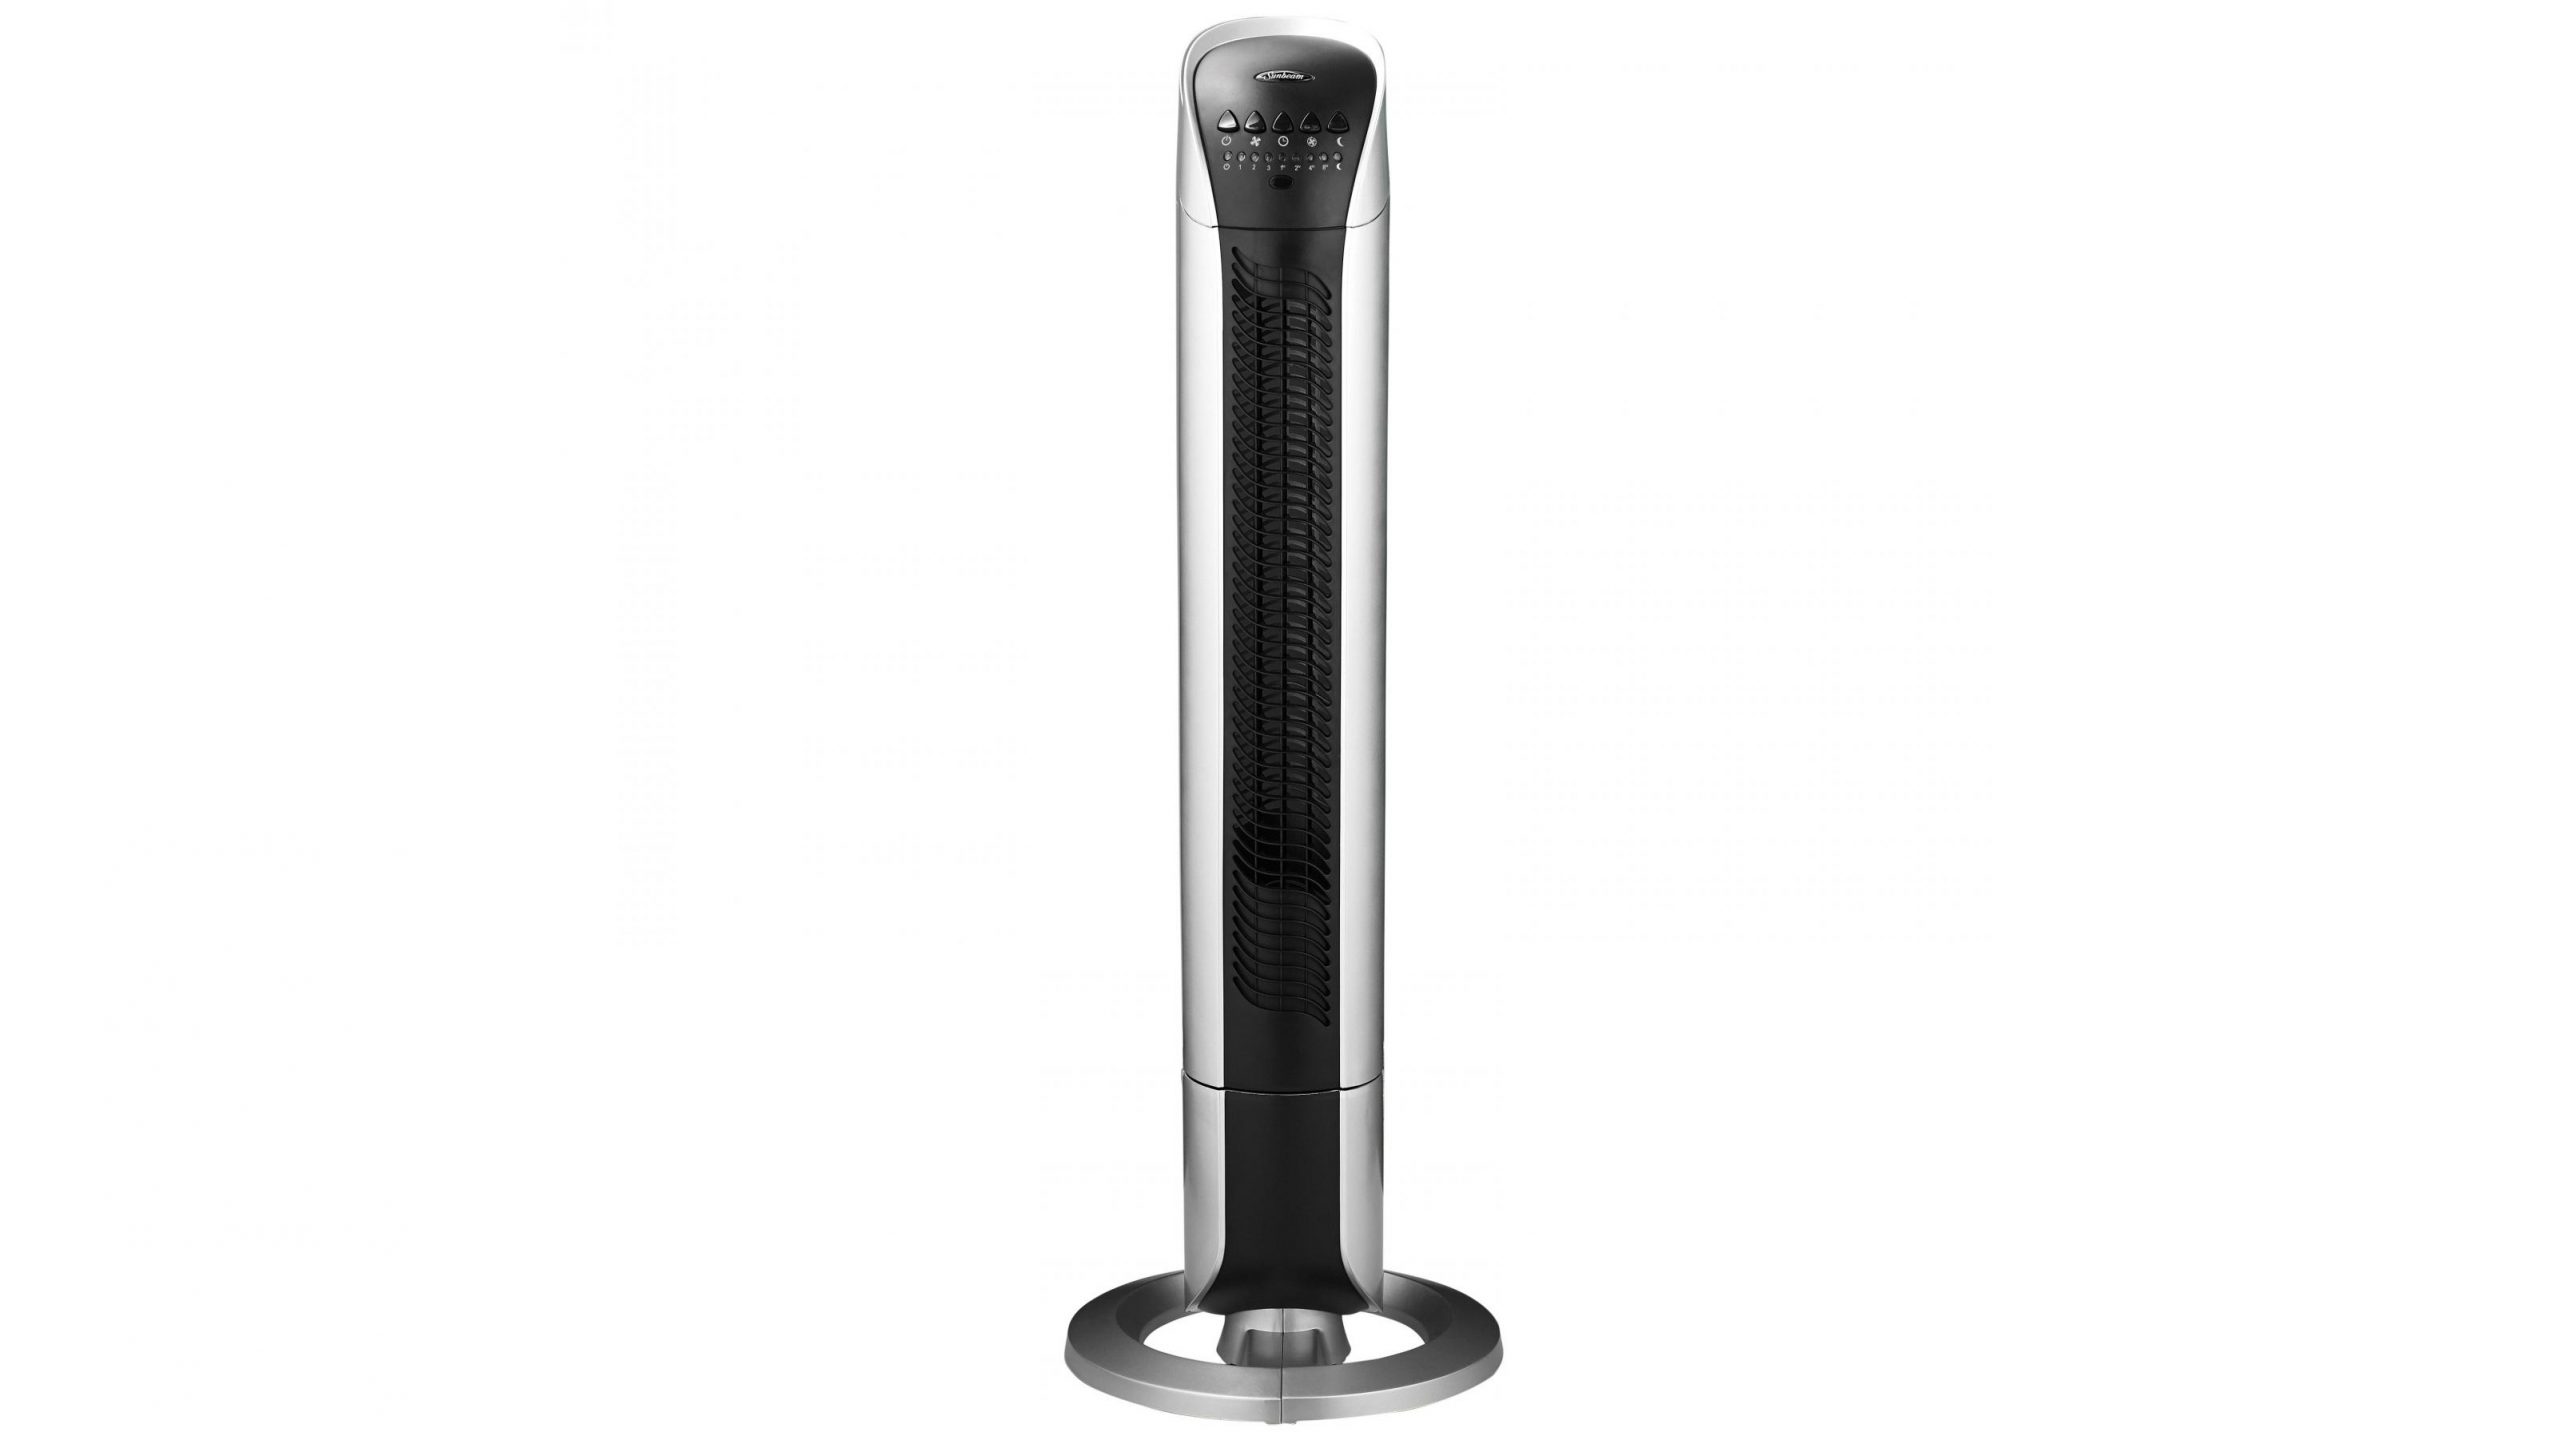 Sunbeam Fa7250 Tower Fan With Night Mode within dimensions 3204 X 1802